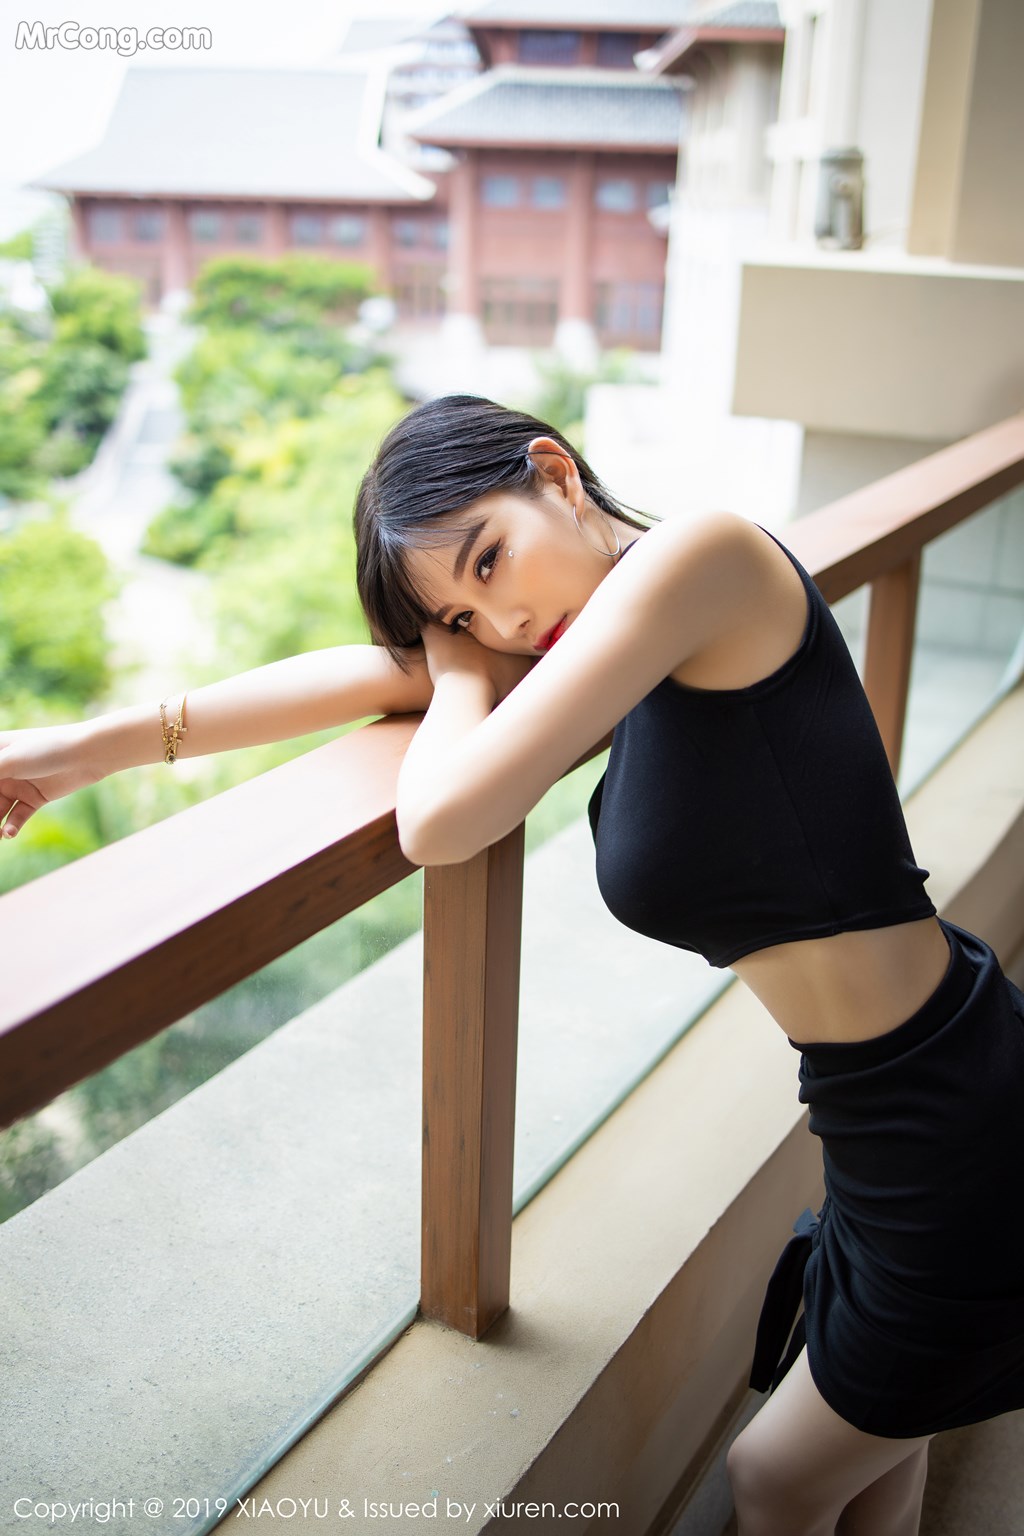 XiaoYu Vol.134: Yang Chen Chen (杨晨晨 sugar) (63 pictures)